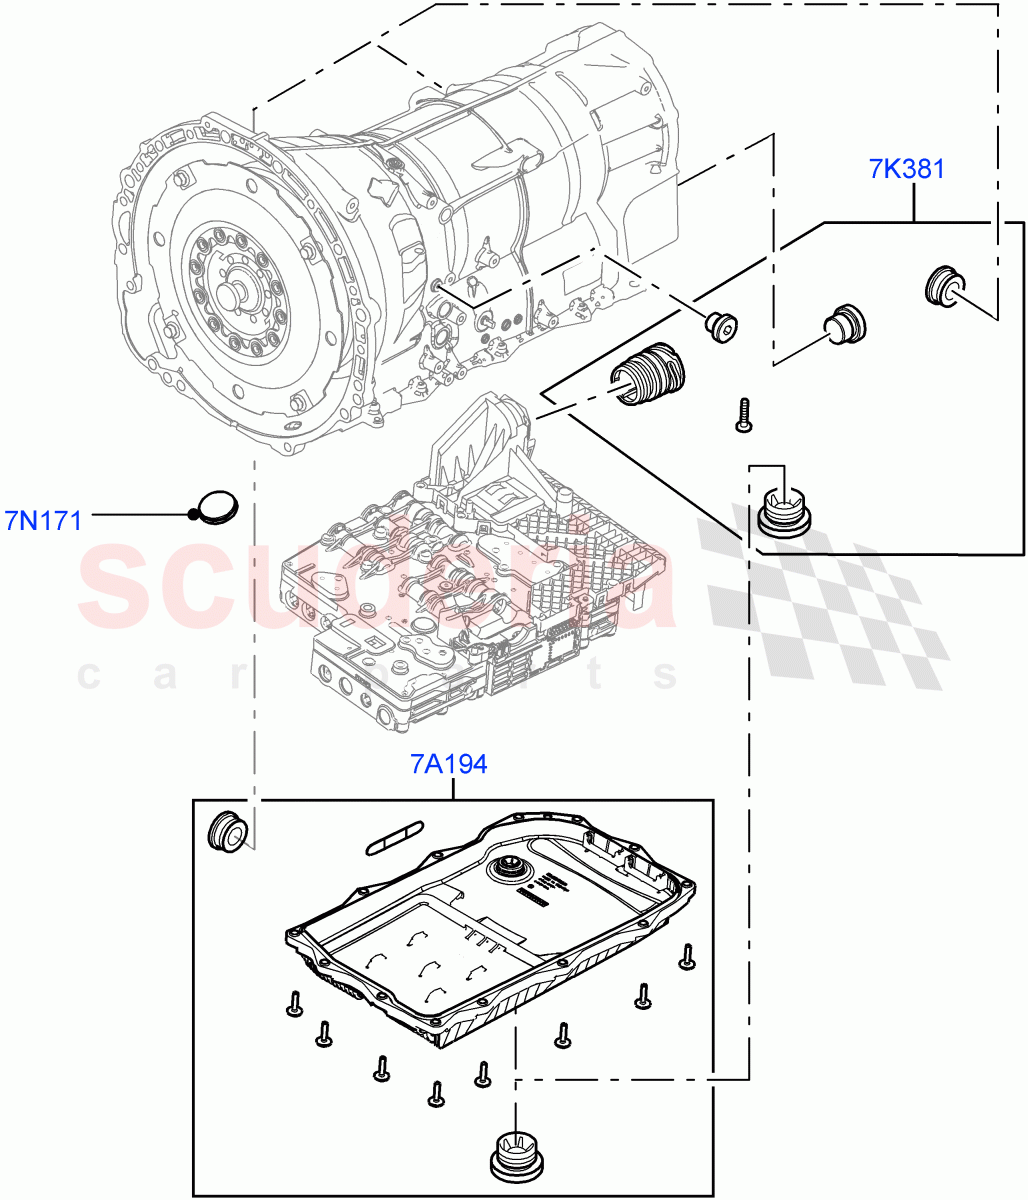 Transmission External Components(Solihull Plant Build)(2.0L I4 DSL HIGH DOHC AJ200,8 Speed Auto Trans ZF 8HP70 4WD)((V)FROMHA000001) of Land Rover Land Rover Discovery 5 (2017+) [3.0 DOHC GDI SC V6 Petrol]